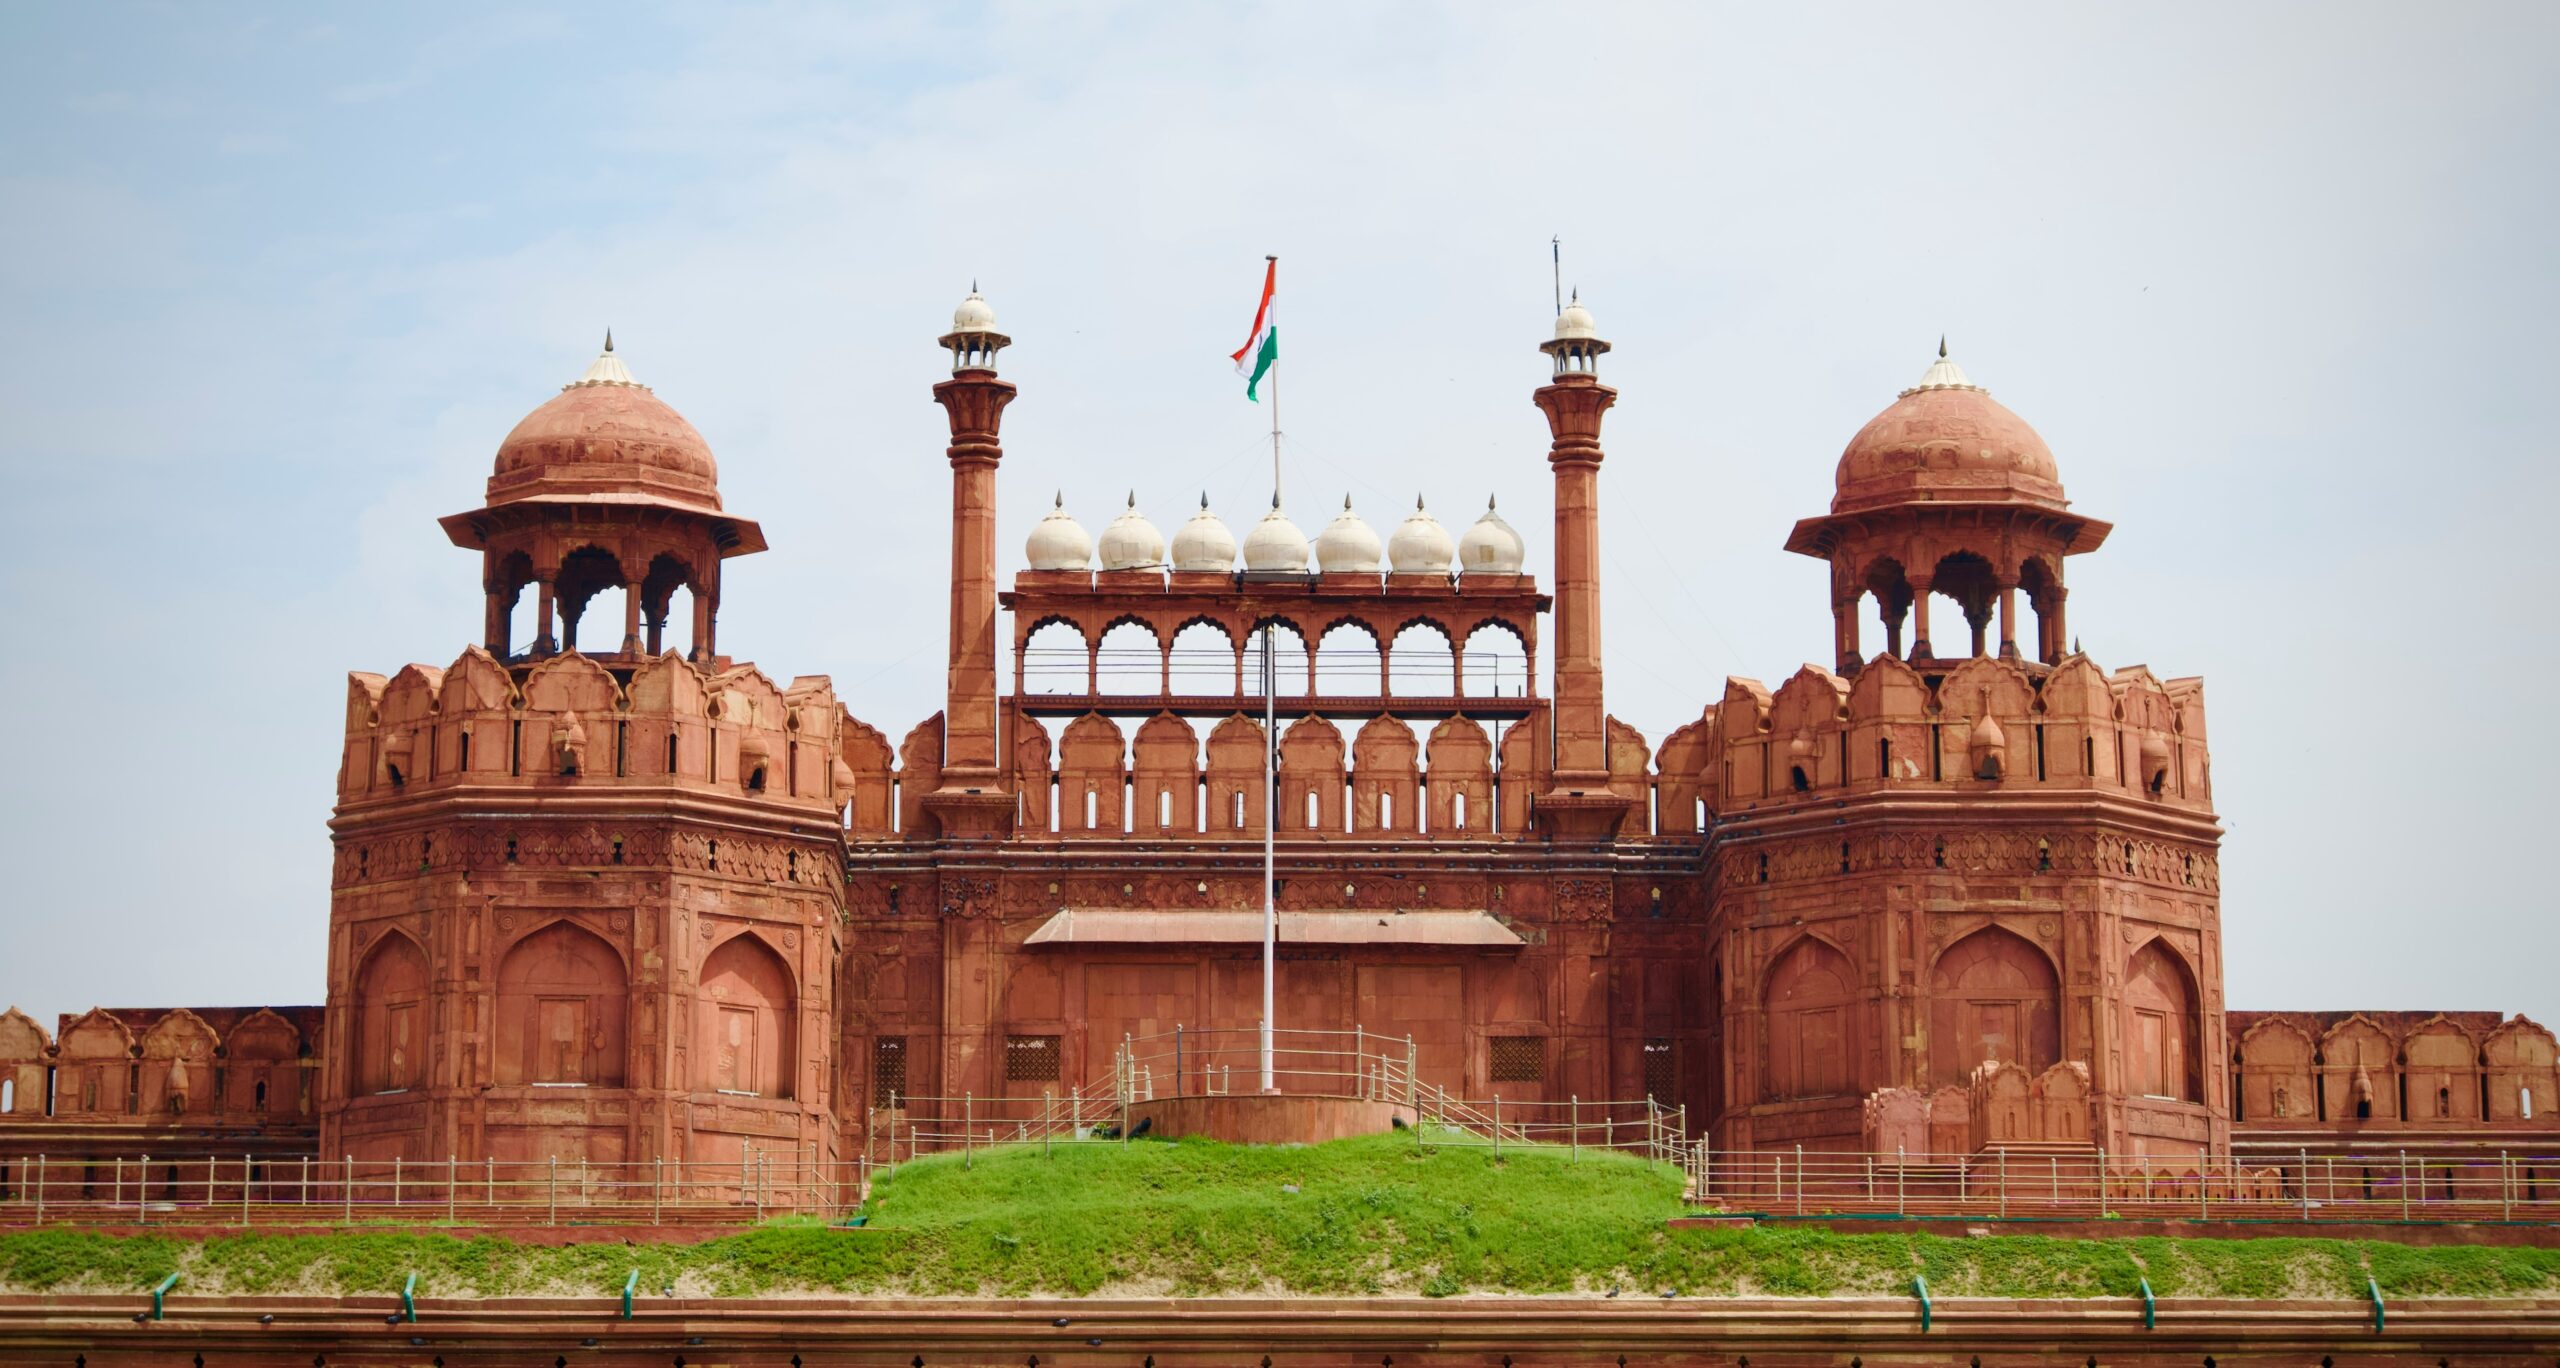 Virtual Tour vs. Physical Visit: The Red Fort Experience